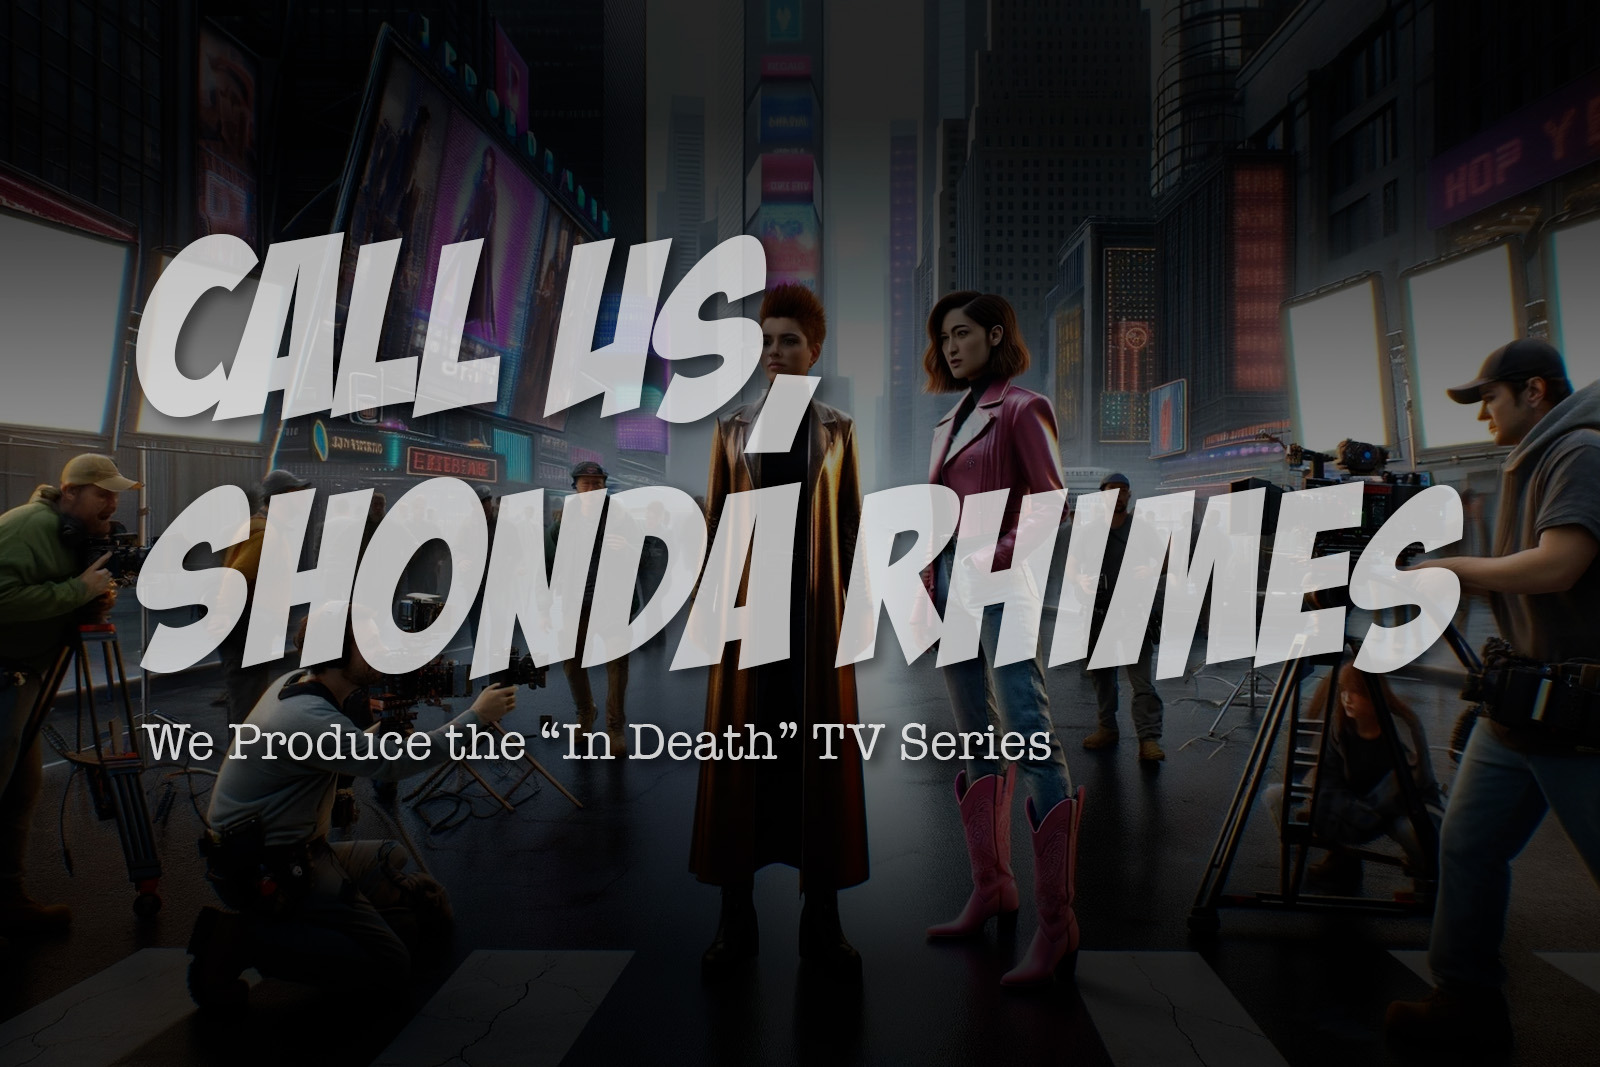 Call Us, Shonda Rhimes! We Produce the “In Death” TV Series